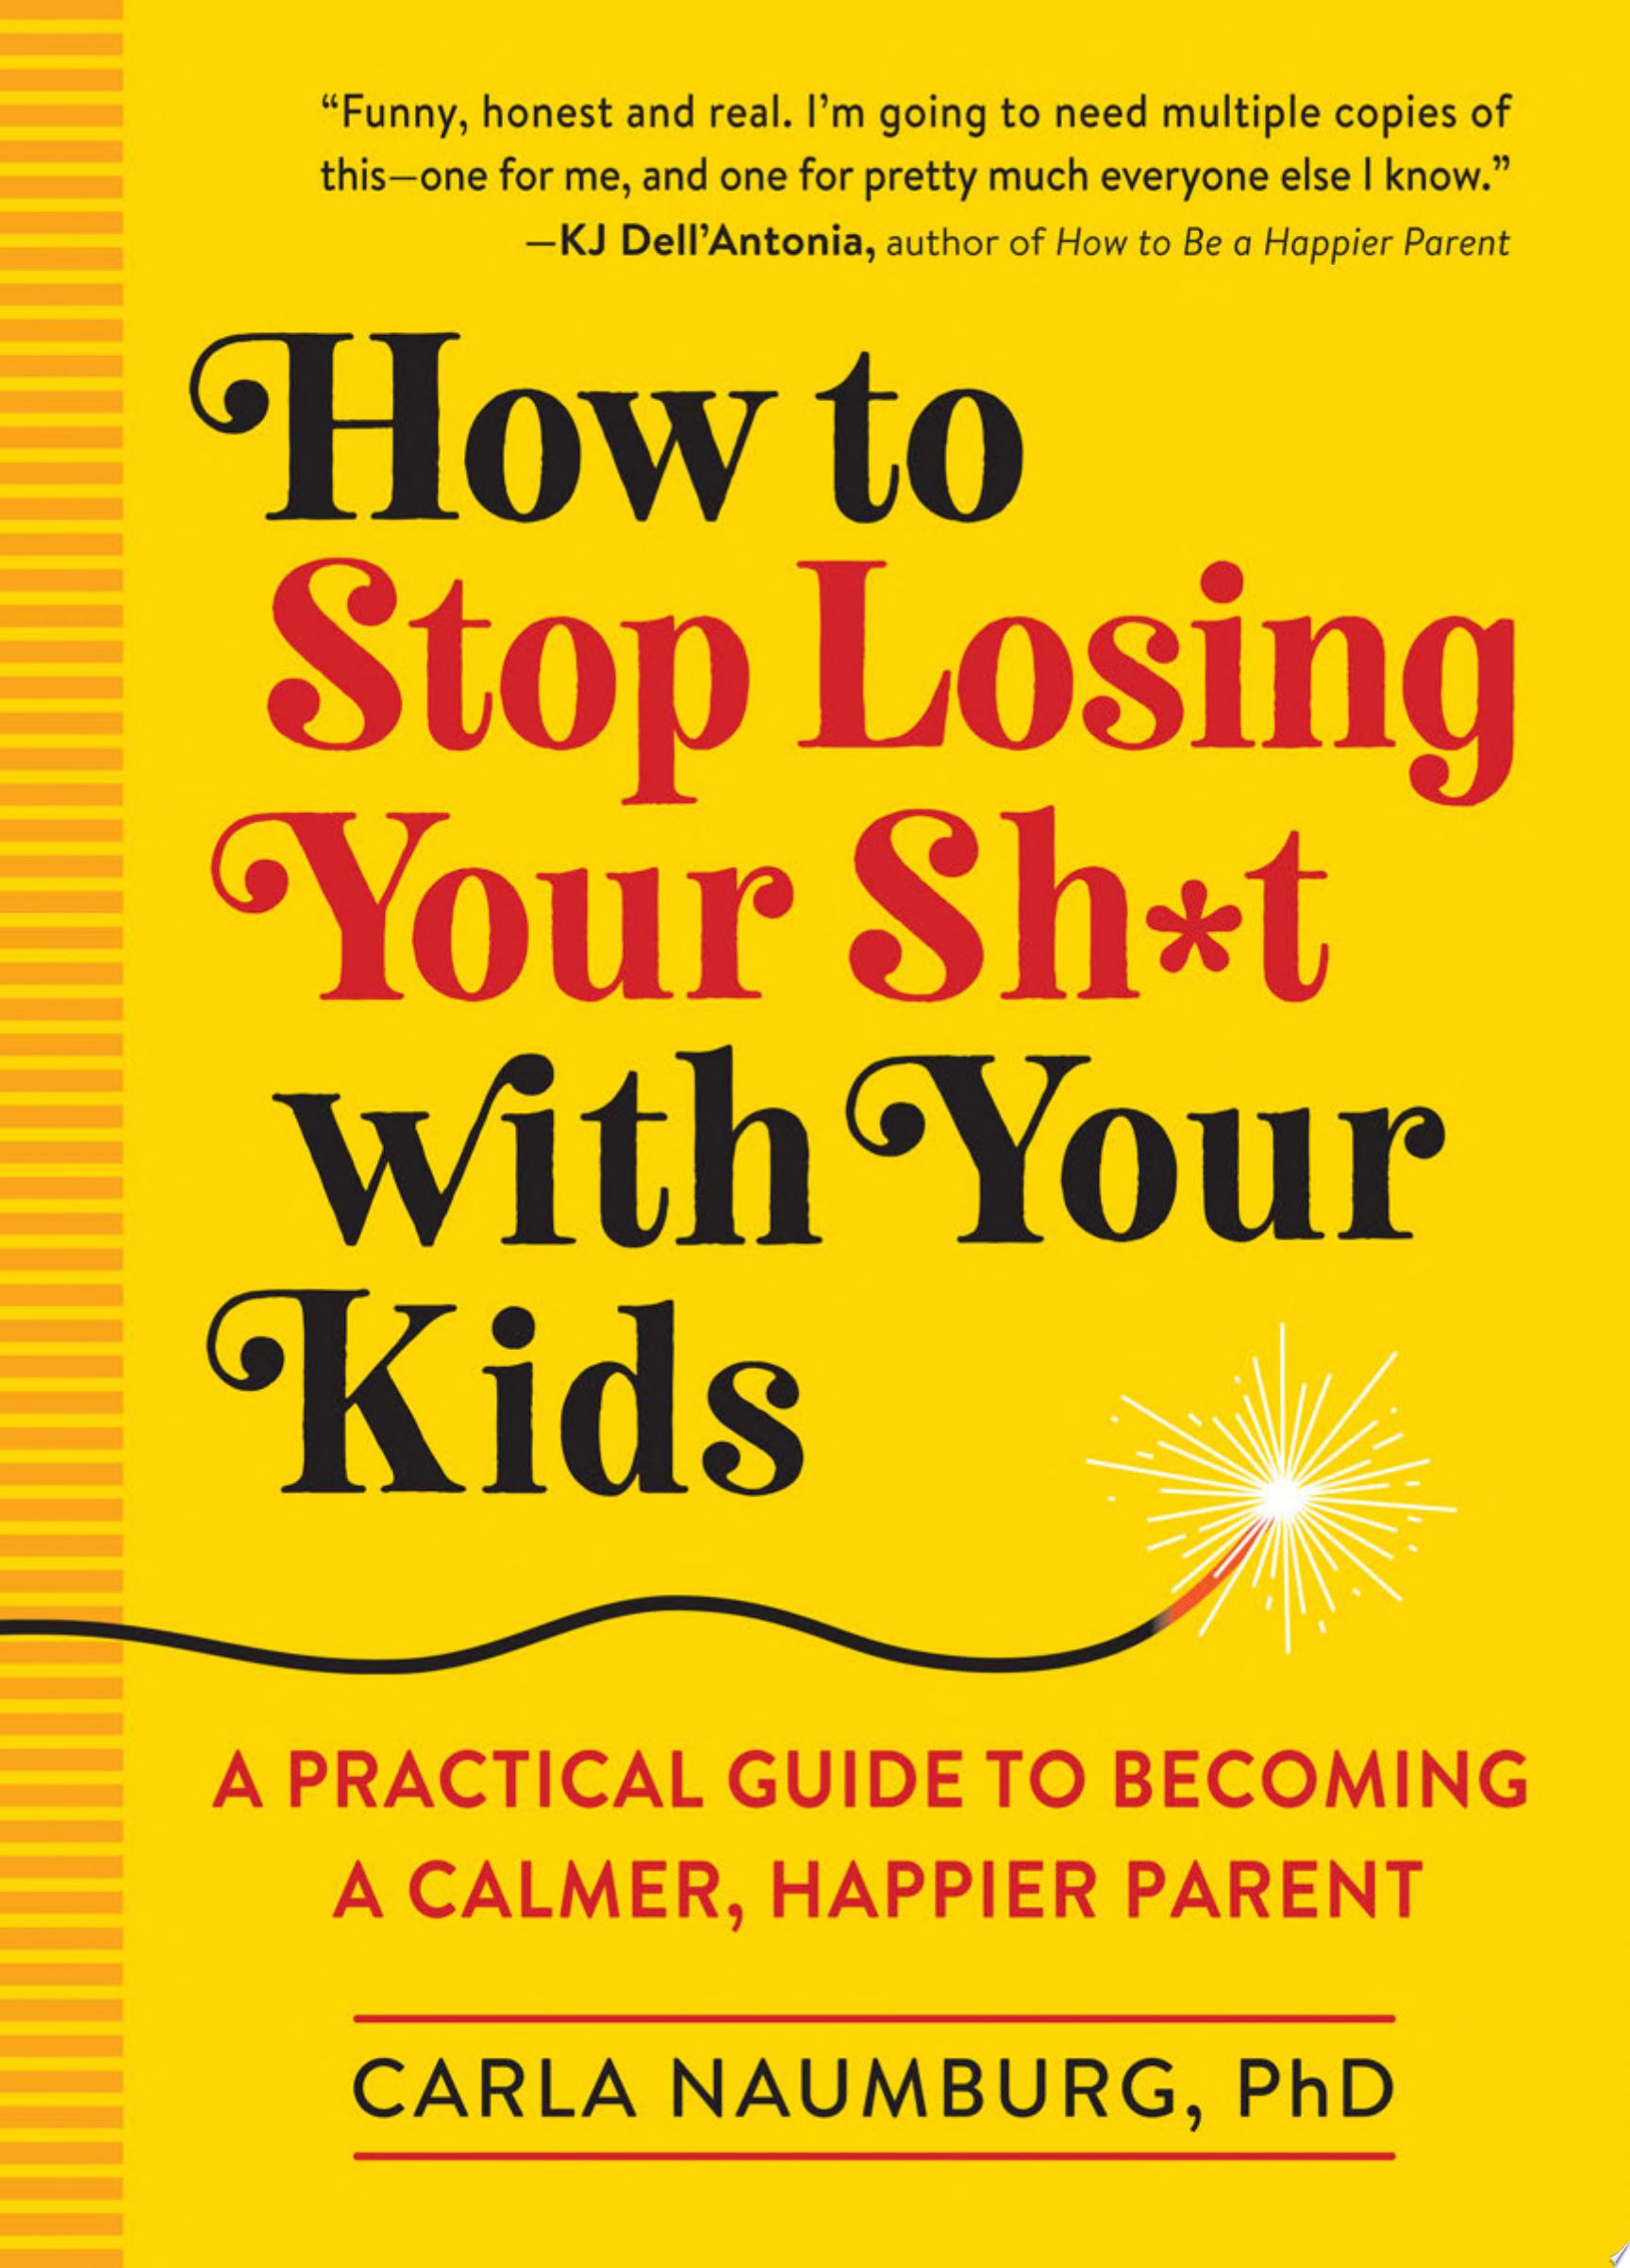 Image for "How to Stop Losing Your Sh*t with Your Kids"